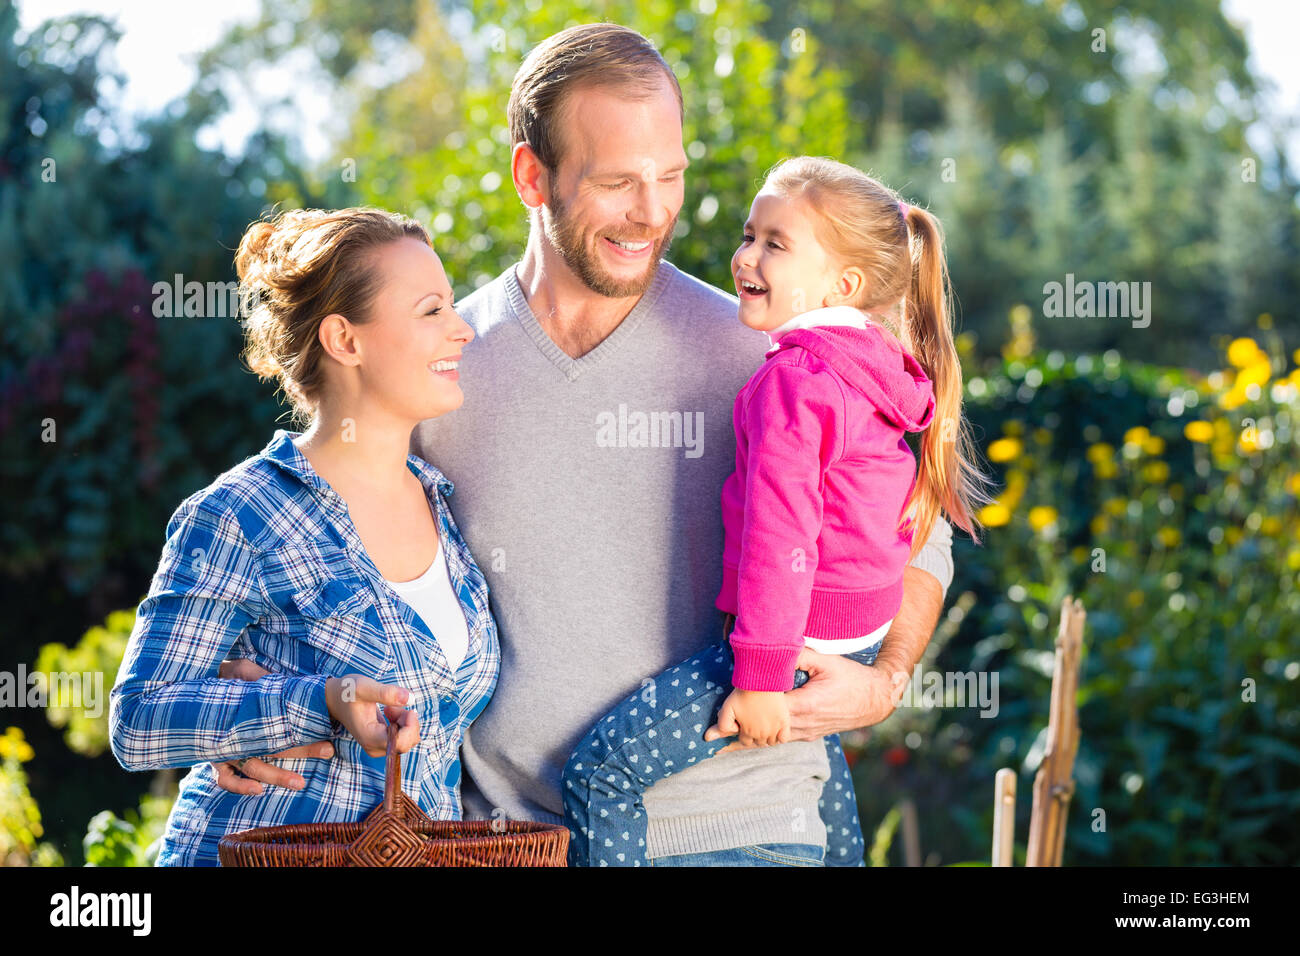 Mother, father and daughter in garden Stock Photo